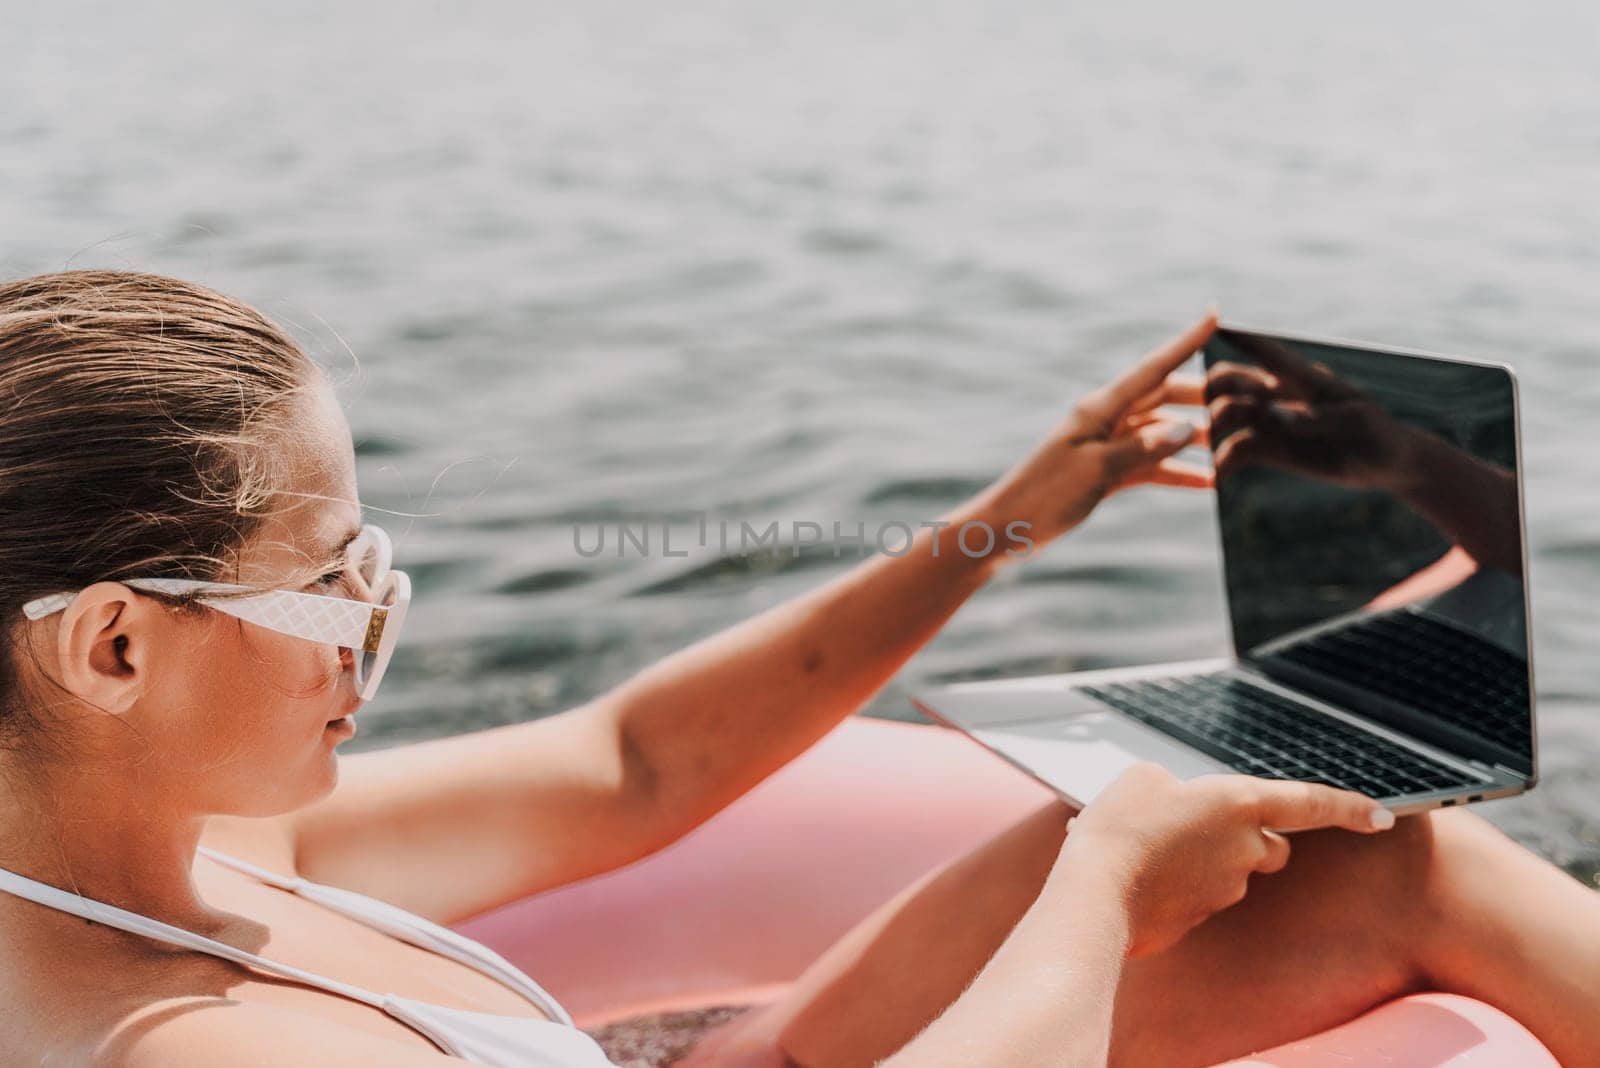 A woman is sitting in a pink inflatable raft with a laptop on her lap. She is wearing sunglasses and she is enjoying her time by the water